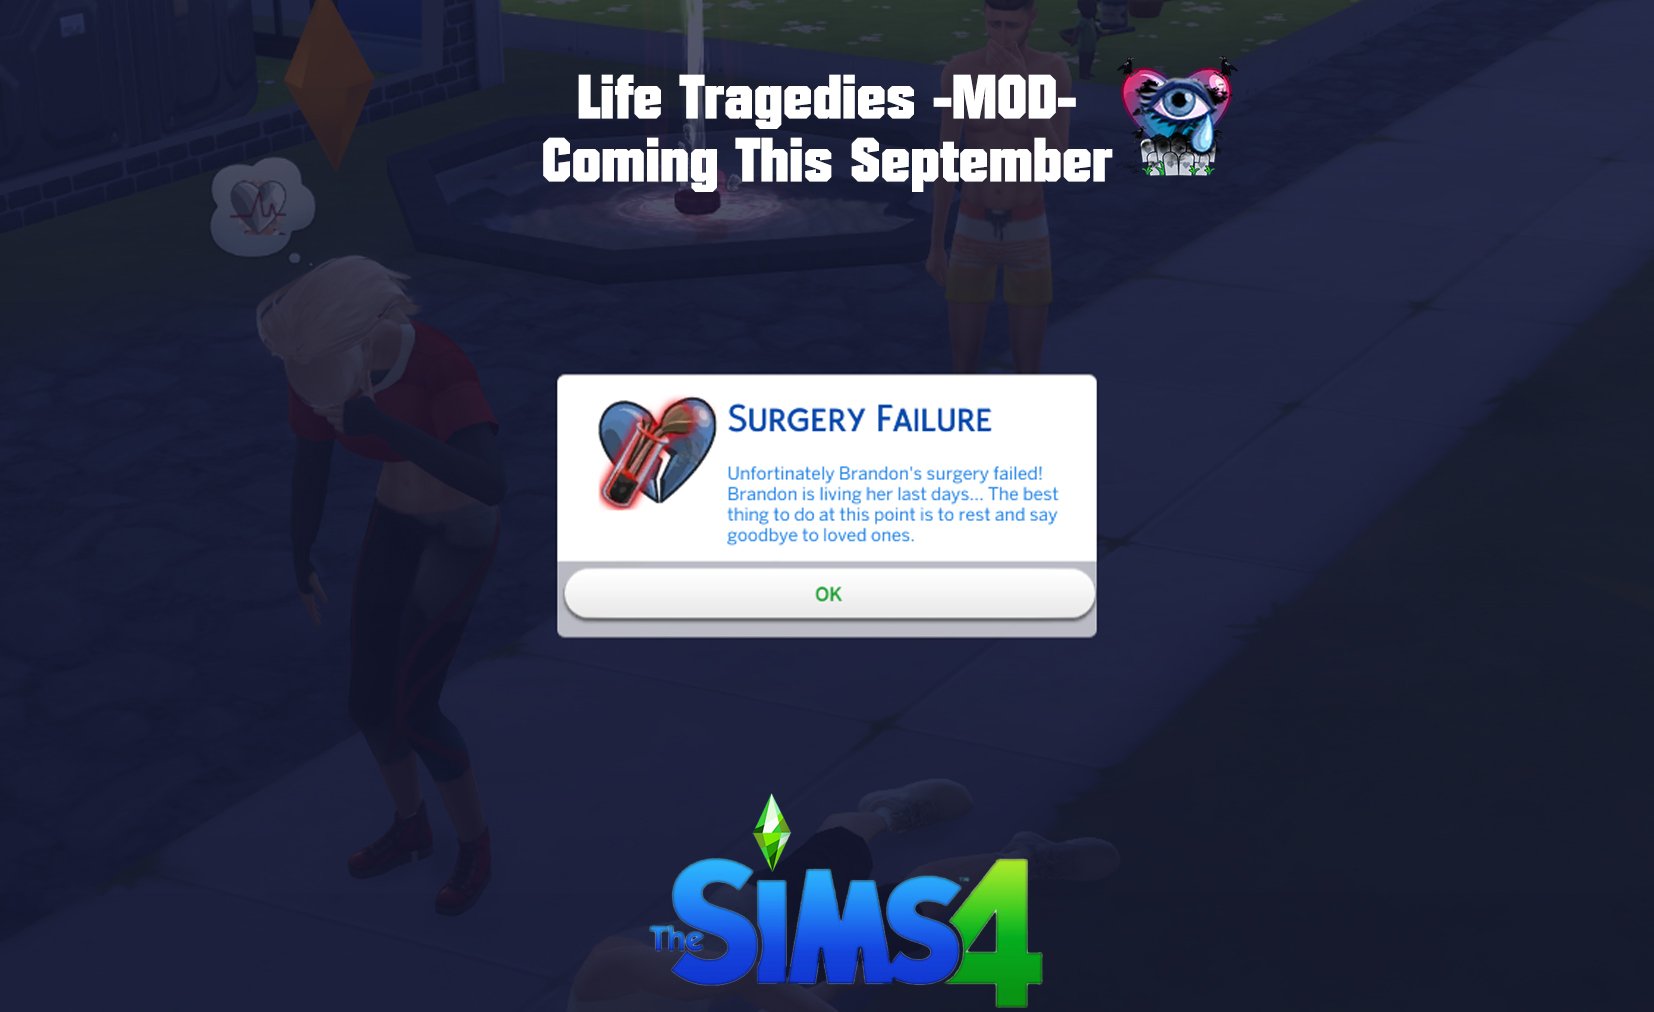 Sacrificial Sims 4 Mods On Twitter Xion47588833 There Will Be Fatal Illness Armed Robbers Bullies Car Accidents Sims Getting Run Over By A Car On The First Release Of The Mod I Ll